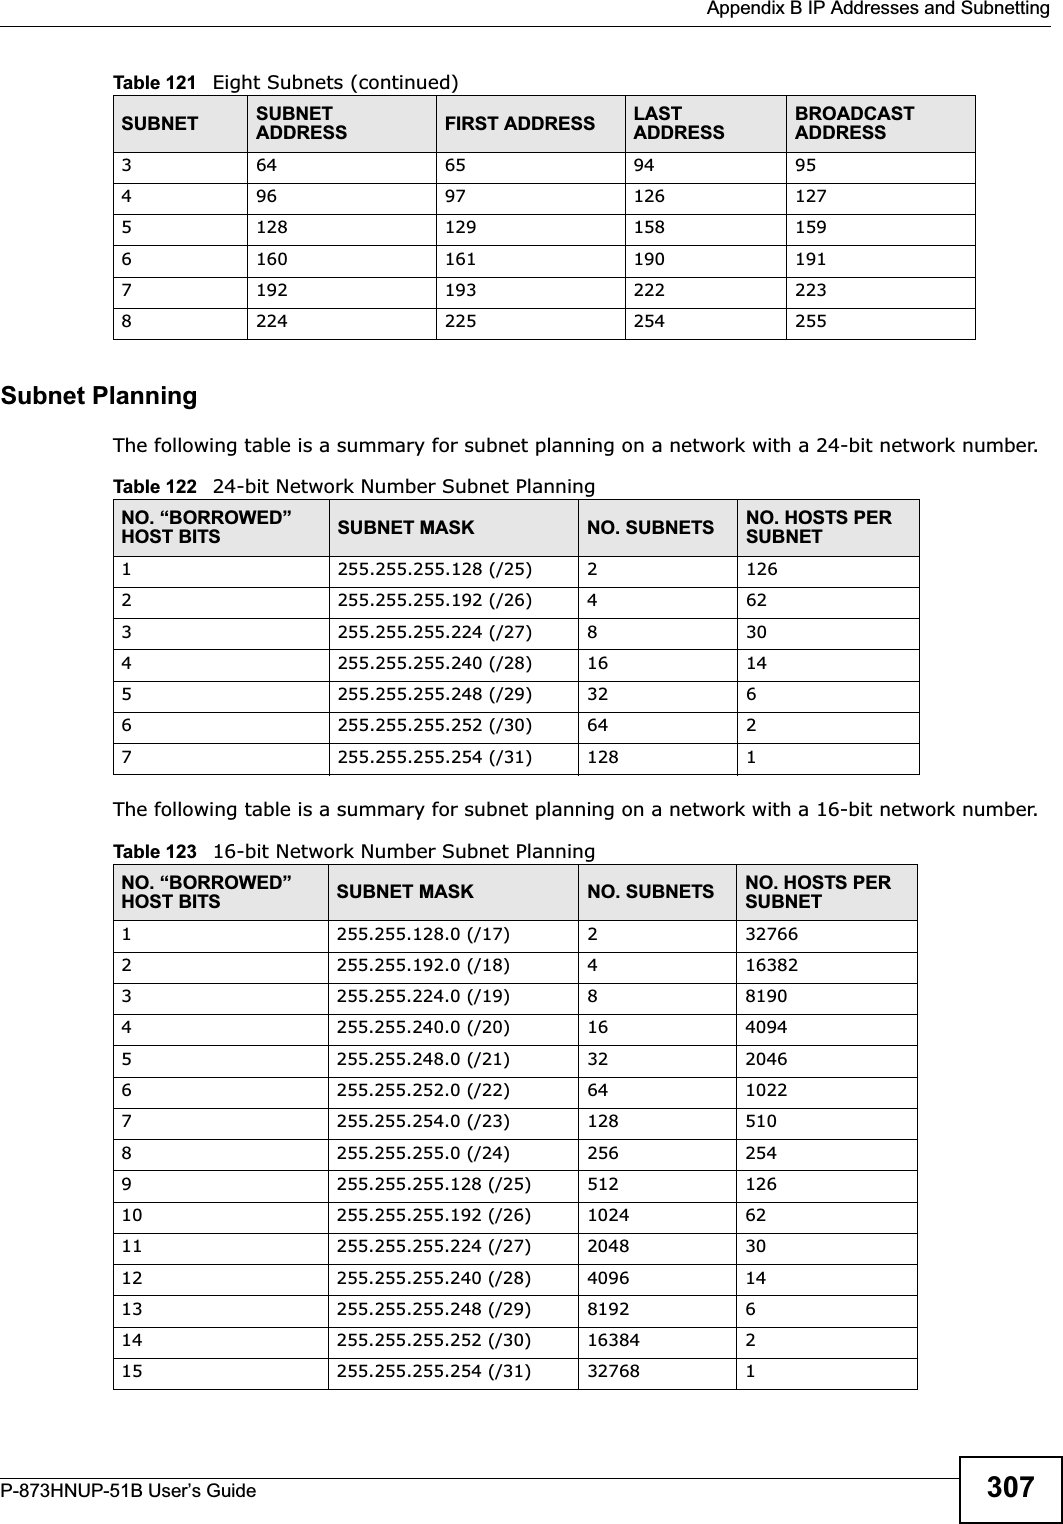  Appendix B IP Addresses and SubnettingP-873HNUP-51B User’s Guide 307Subnet PlanningThe following table is a summary for subnet planning on a network with a 24-bit network number.The following table is a summary for subnet planning on a network with a 16-bit network number. 364 65 94 95496 97 126 1275128 129 158 1596160 161 190 1917192 193 222 2238224 225 254 255Table 121   Eight Subnets (continued)SUBNET SUBNETADDRESS FIRST ADDRESS LAST ADDRESSBROADCAST ADDRESSTable 122   24-bit Network Number Subnet PlanningNO. “BORROWED” HOST BITS SUBNET MASK NO. SUBNETS NO. HOSTS PER SUBNET1255.255.255.128 (/25) 21262255.255.255.192 (/26) 4623255.255.255.224 (/27) 8304255.255.255.240 (/28) 16 145255.255.255.248 (/29) 32 66255.255.255.252 (/30) 64 27255.255.255.254 (/31) 128 1Table 123   16-bit Network Number Subnet PlanningNO. “BORROWED” HOST BITS SUBNET MASK NO. SUBNETS NO. HOSTS PER SUBNET1255.255.128.0 (/17) 2327662255.255.192.0 (/18) 4163823255.255.224.0 (/19) 881904255.255.240.0 (/20) 16 40945255.255.248.0 (/21) 32 20466255.255.252.0 (/22) 64 10227255.255.254.0 (/23) 128 5108255.255.255.0 (/24) 256 2549255.255.255.128 (/25) 512 12610 255.255.255.192 (/26) 1024 6211 255.255.255.224 (/27) 2048 3012 255.255.255.240 (/28) 4096 1413 255.255.255.248 (/29) 8192 614 255.255.255.252 (/30) 16384 215 255.255.255.254 (/31) 32768 1